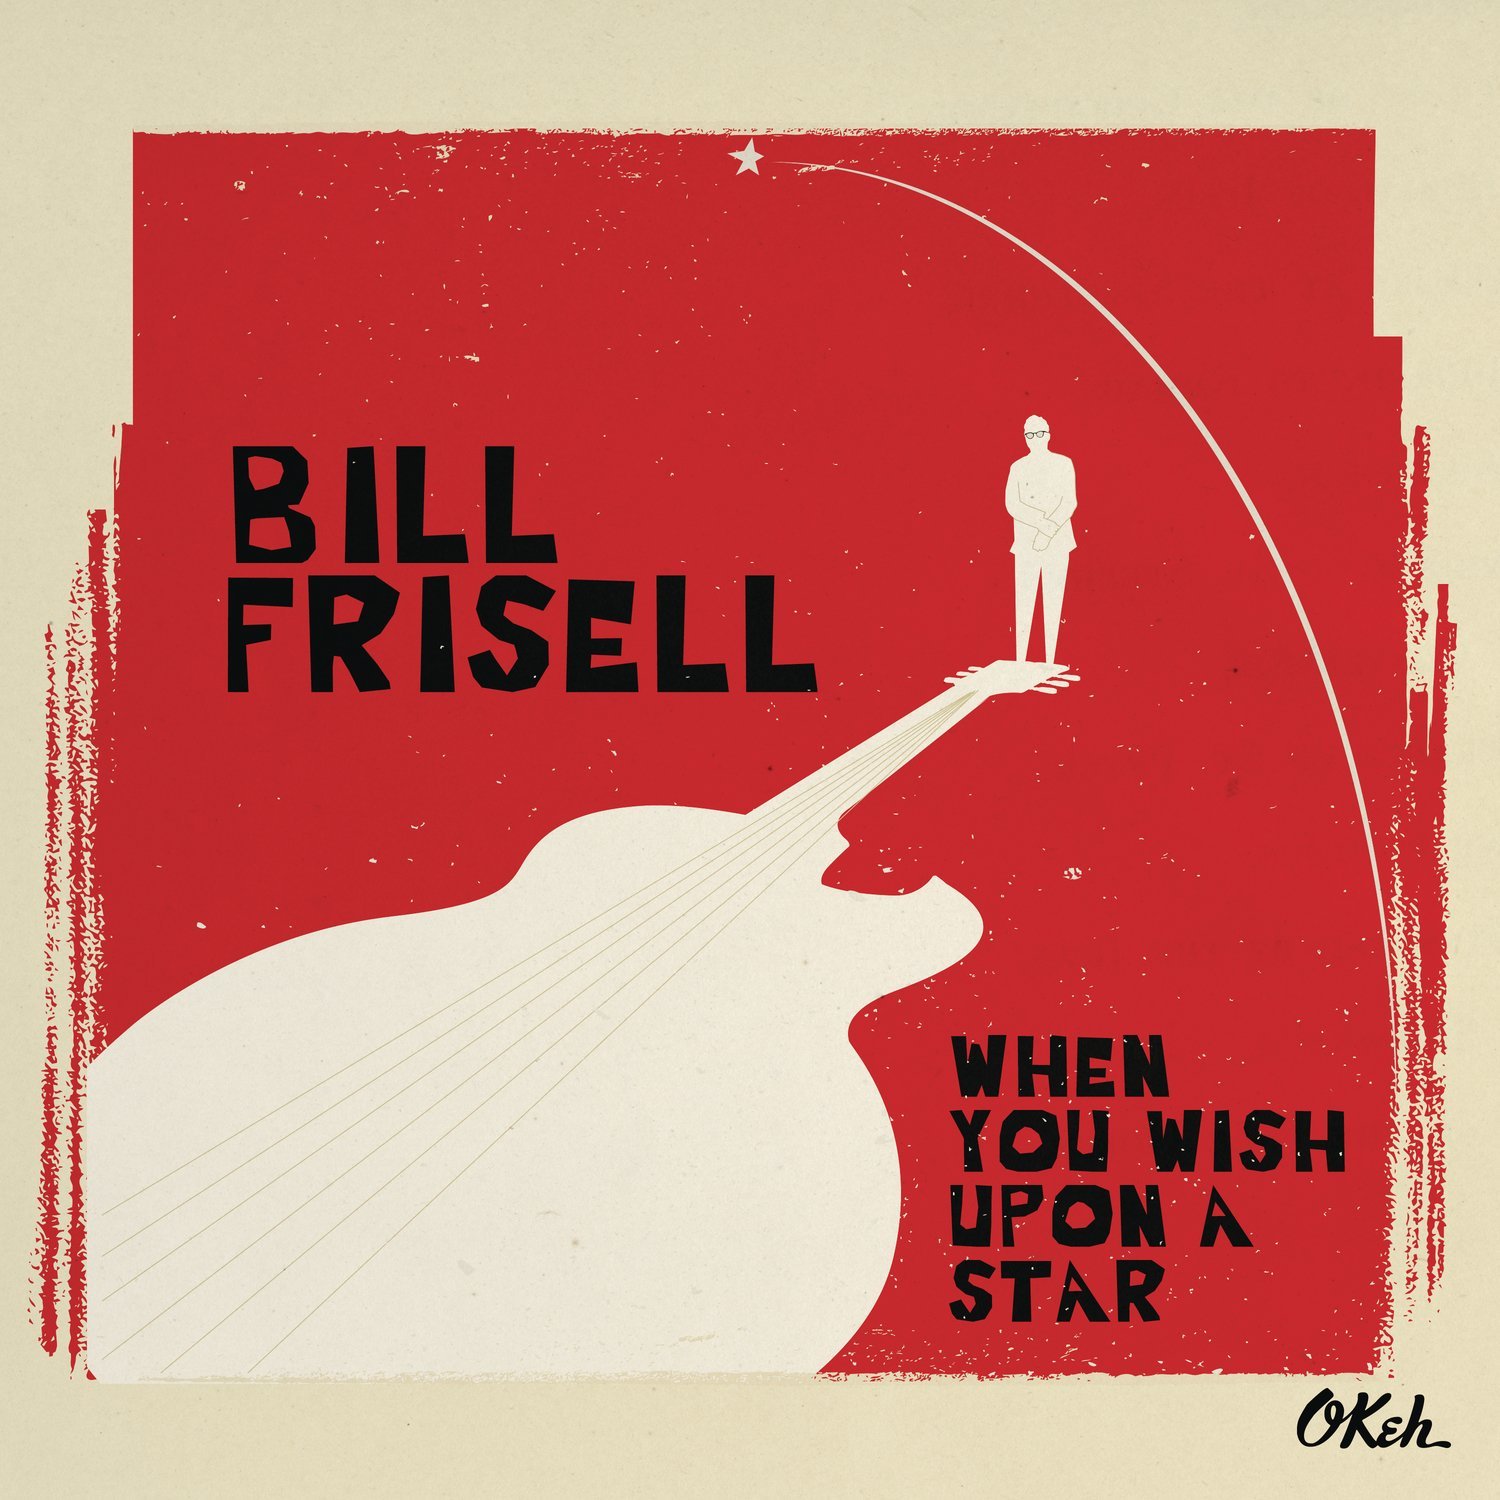 Bill Frisell - When You Wish Upon A Star (2016) [HDTracks FLAC 24bit/96kHz]